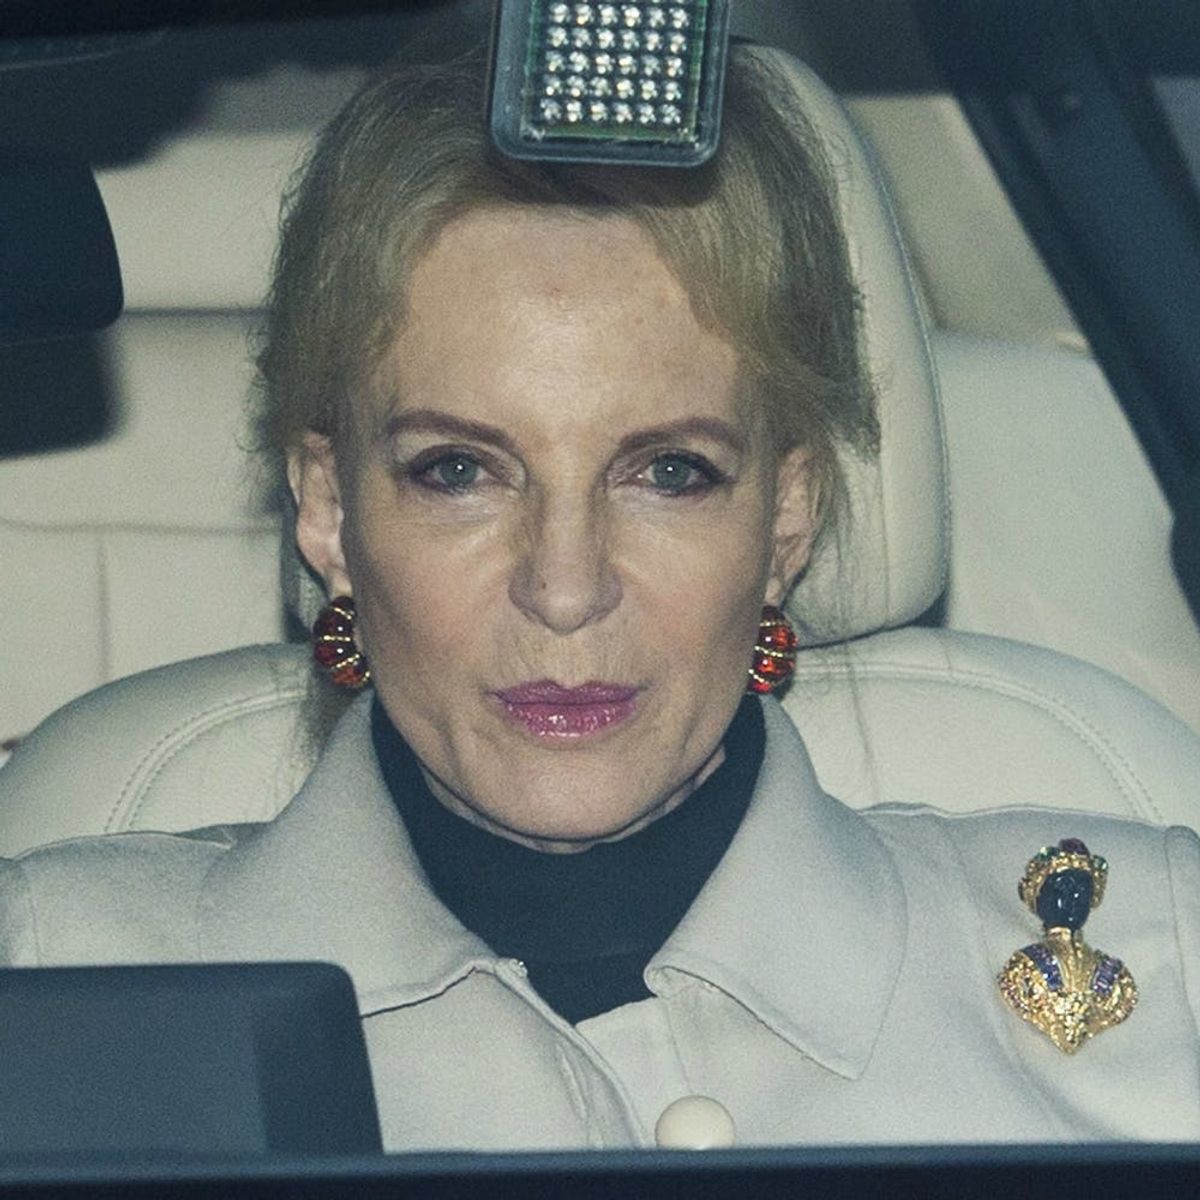 The Queen’s Cousin Wore a Racist Brooch to the Royals’ Christmas Lunch